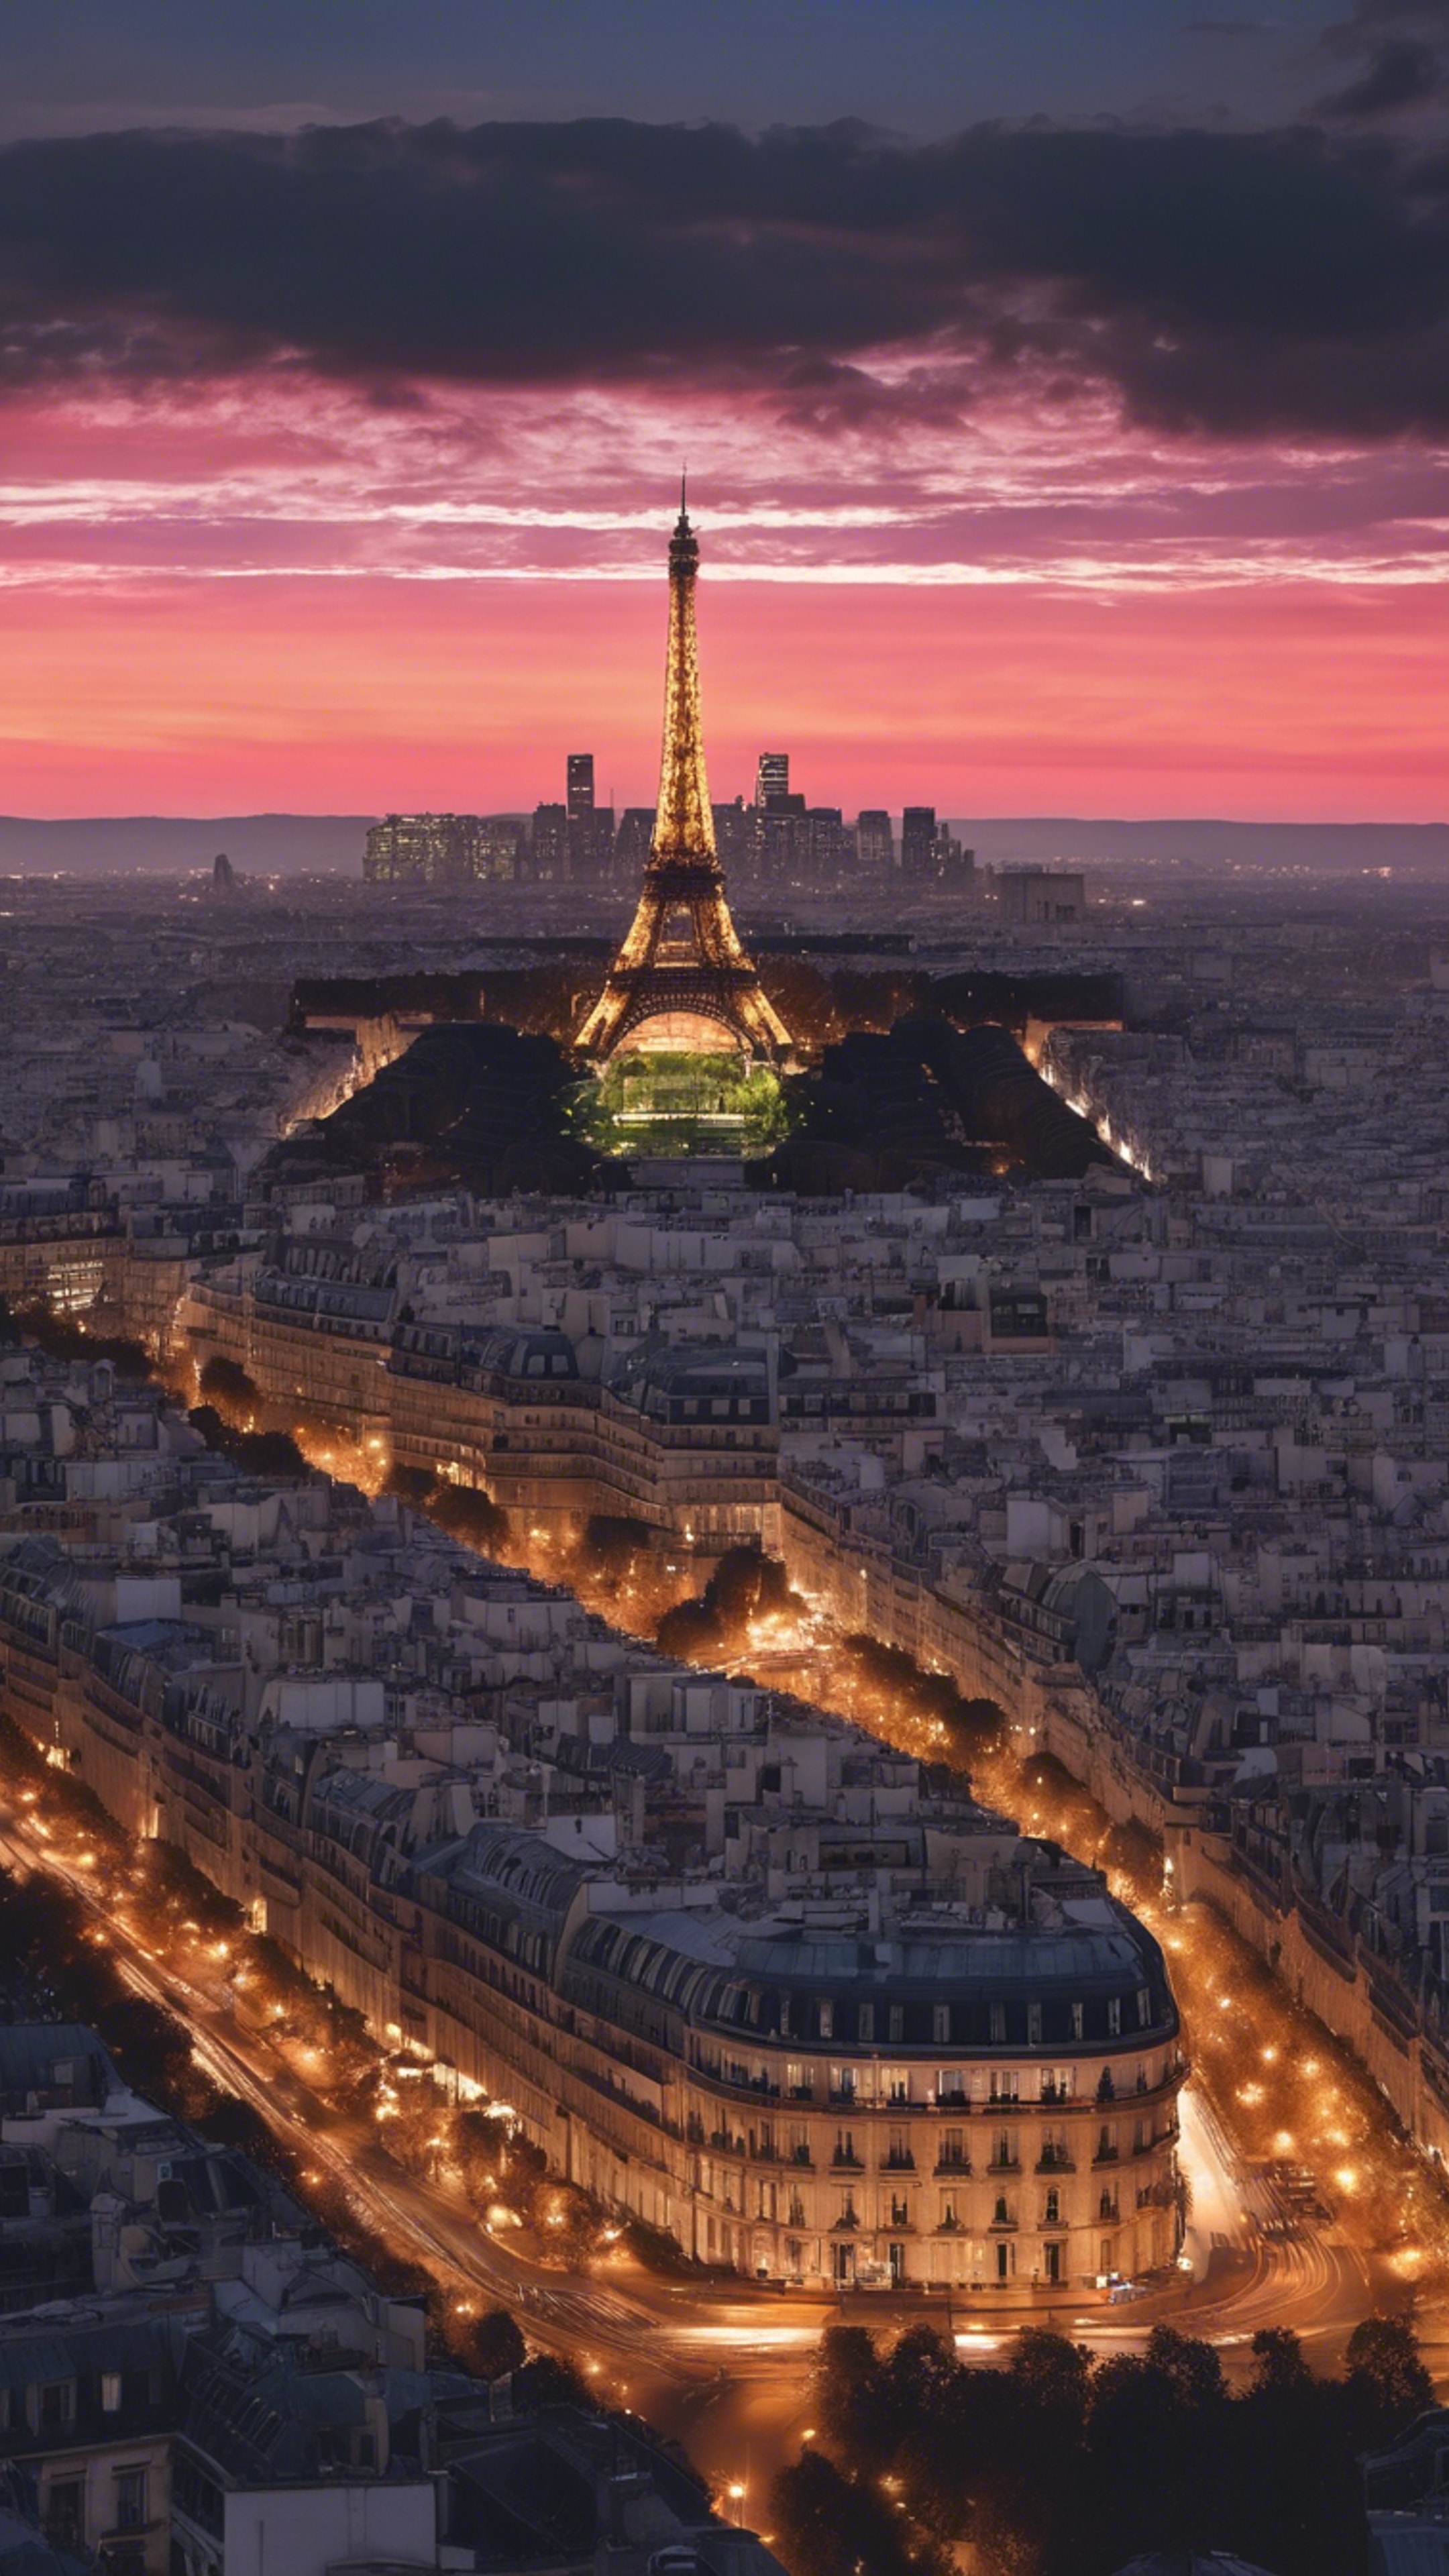 A sweeping cityscape silhouette of Paris at dusk, the city lights twinkling below a vibrant sunset.壁紙[d7c92cee12fd43d0b34a]